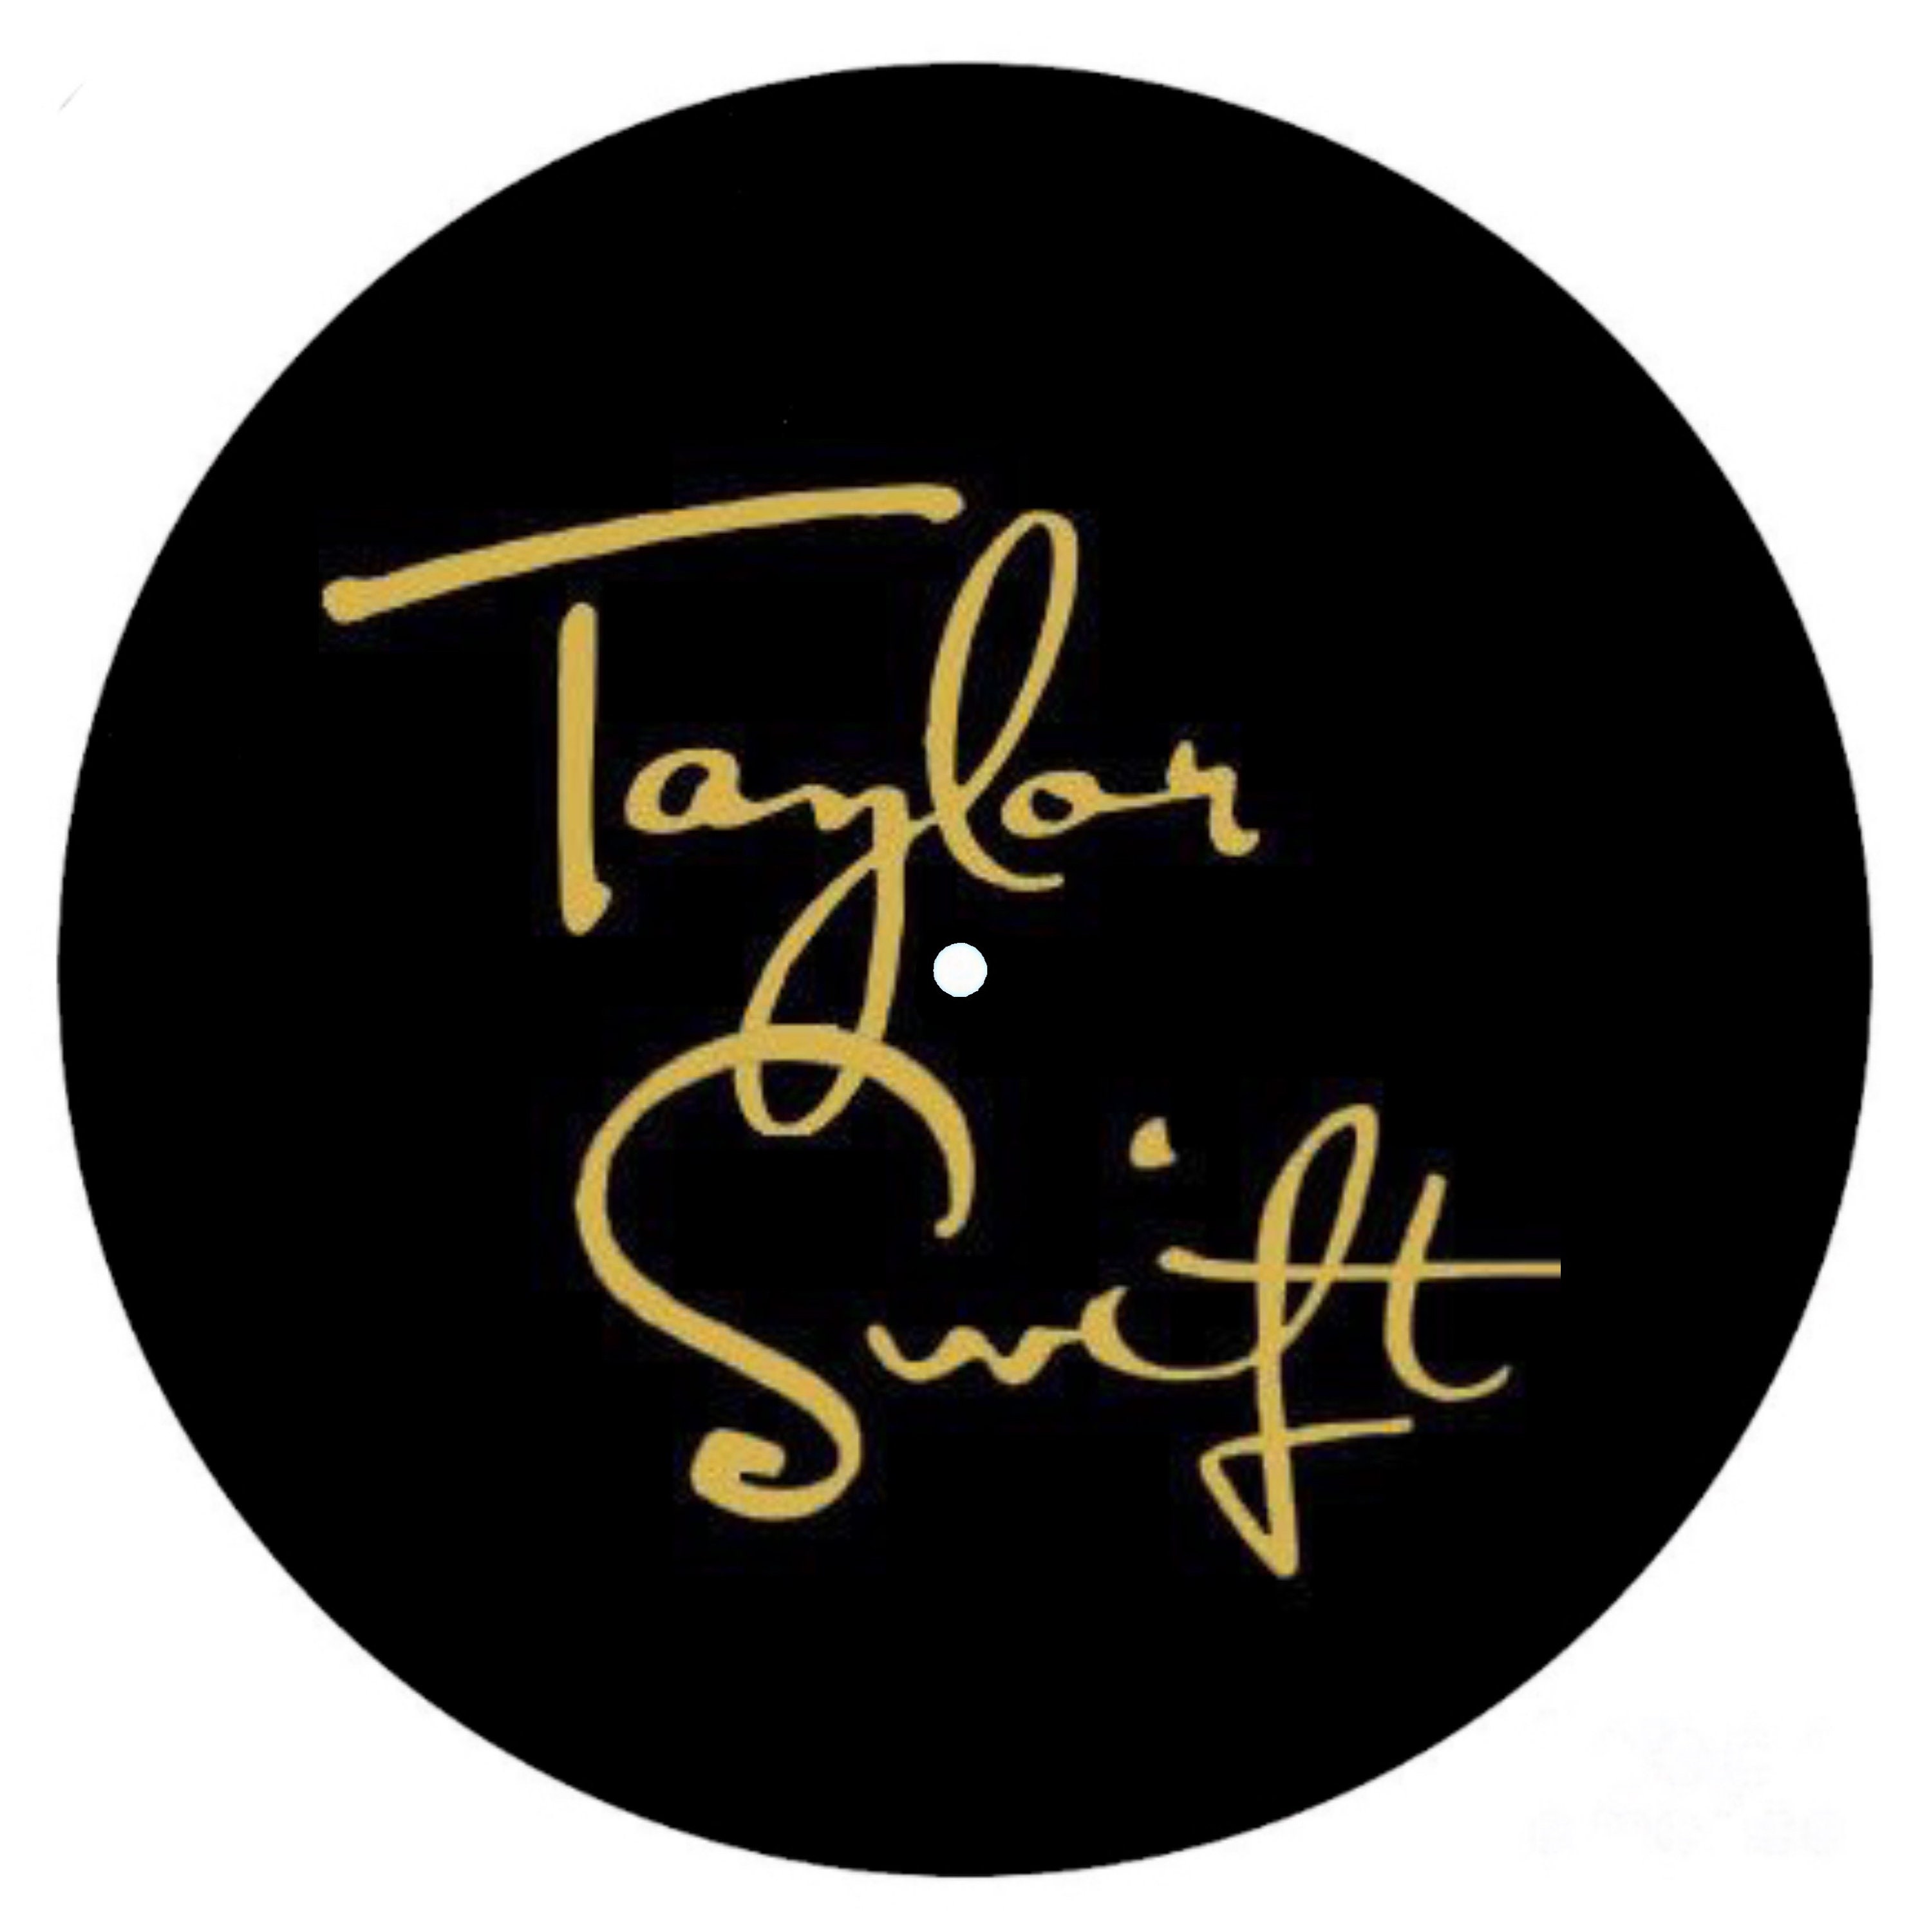 Taylor Swift Lover, Framed Vinyl Record & Album Cover, Ready to Hang, Music  Gift, Wall Art 